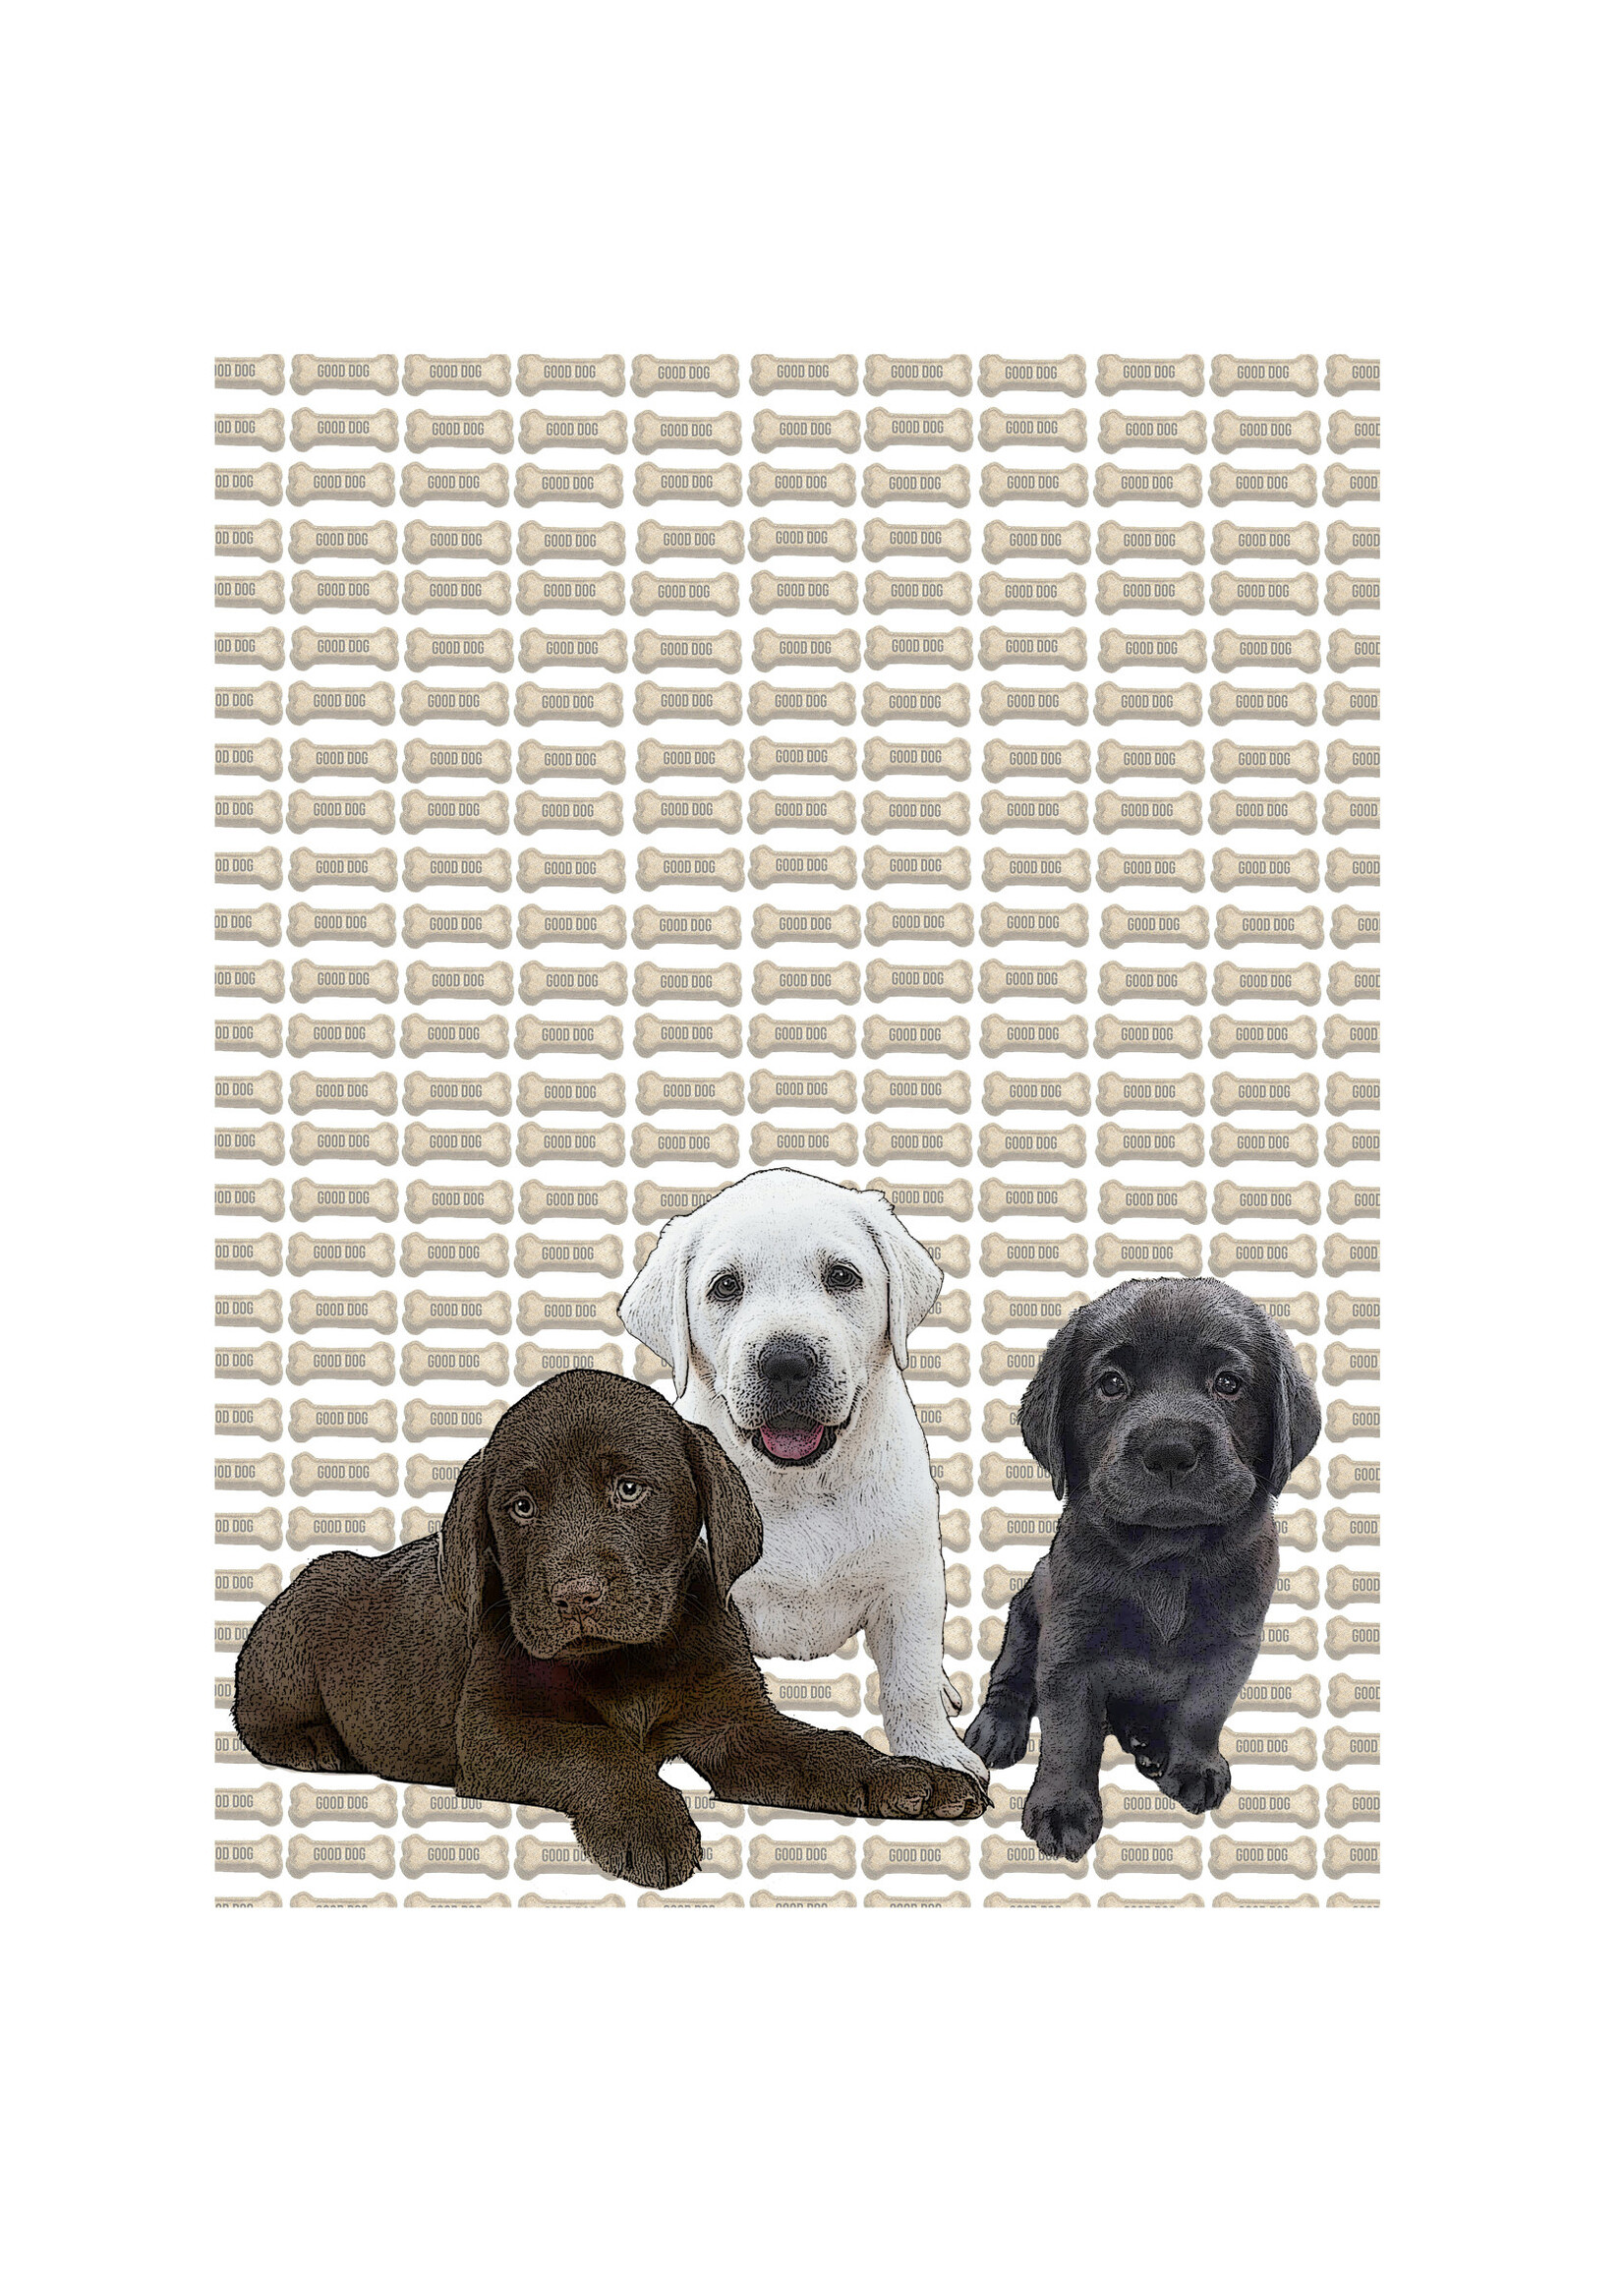 Alphie and Ollie Lab puppies kitchen towel 18 x 24 inches flour sack material